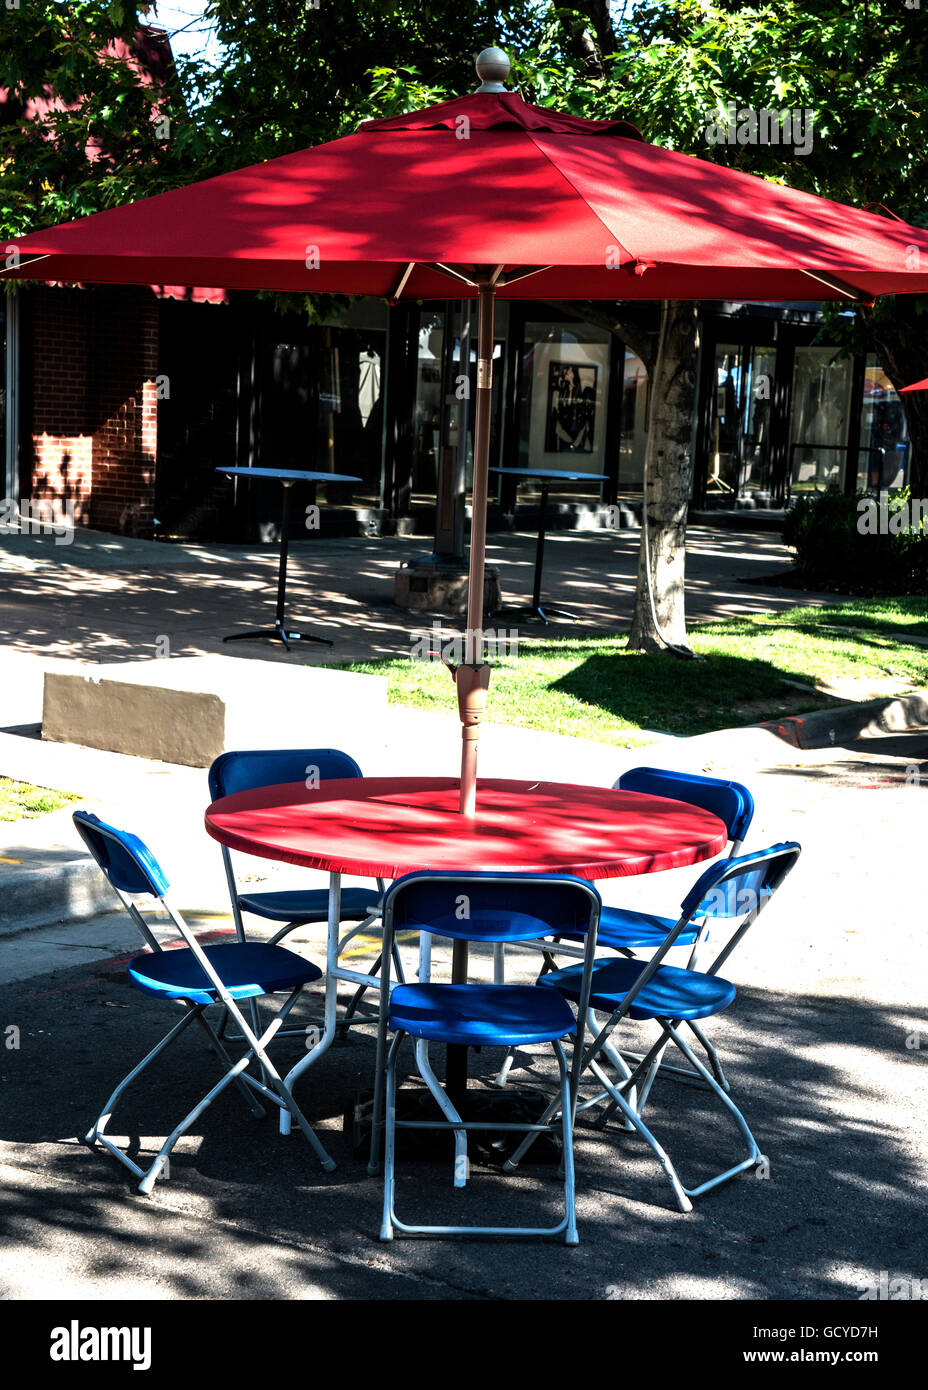 Red umbrella and red table with blue chairs at Cherry Creek Art Festival in Denver Colorado Stock Photo